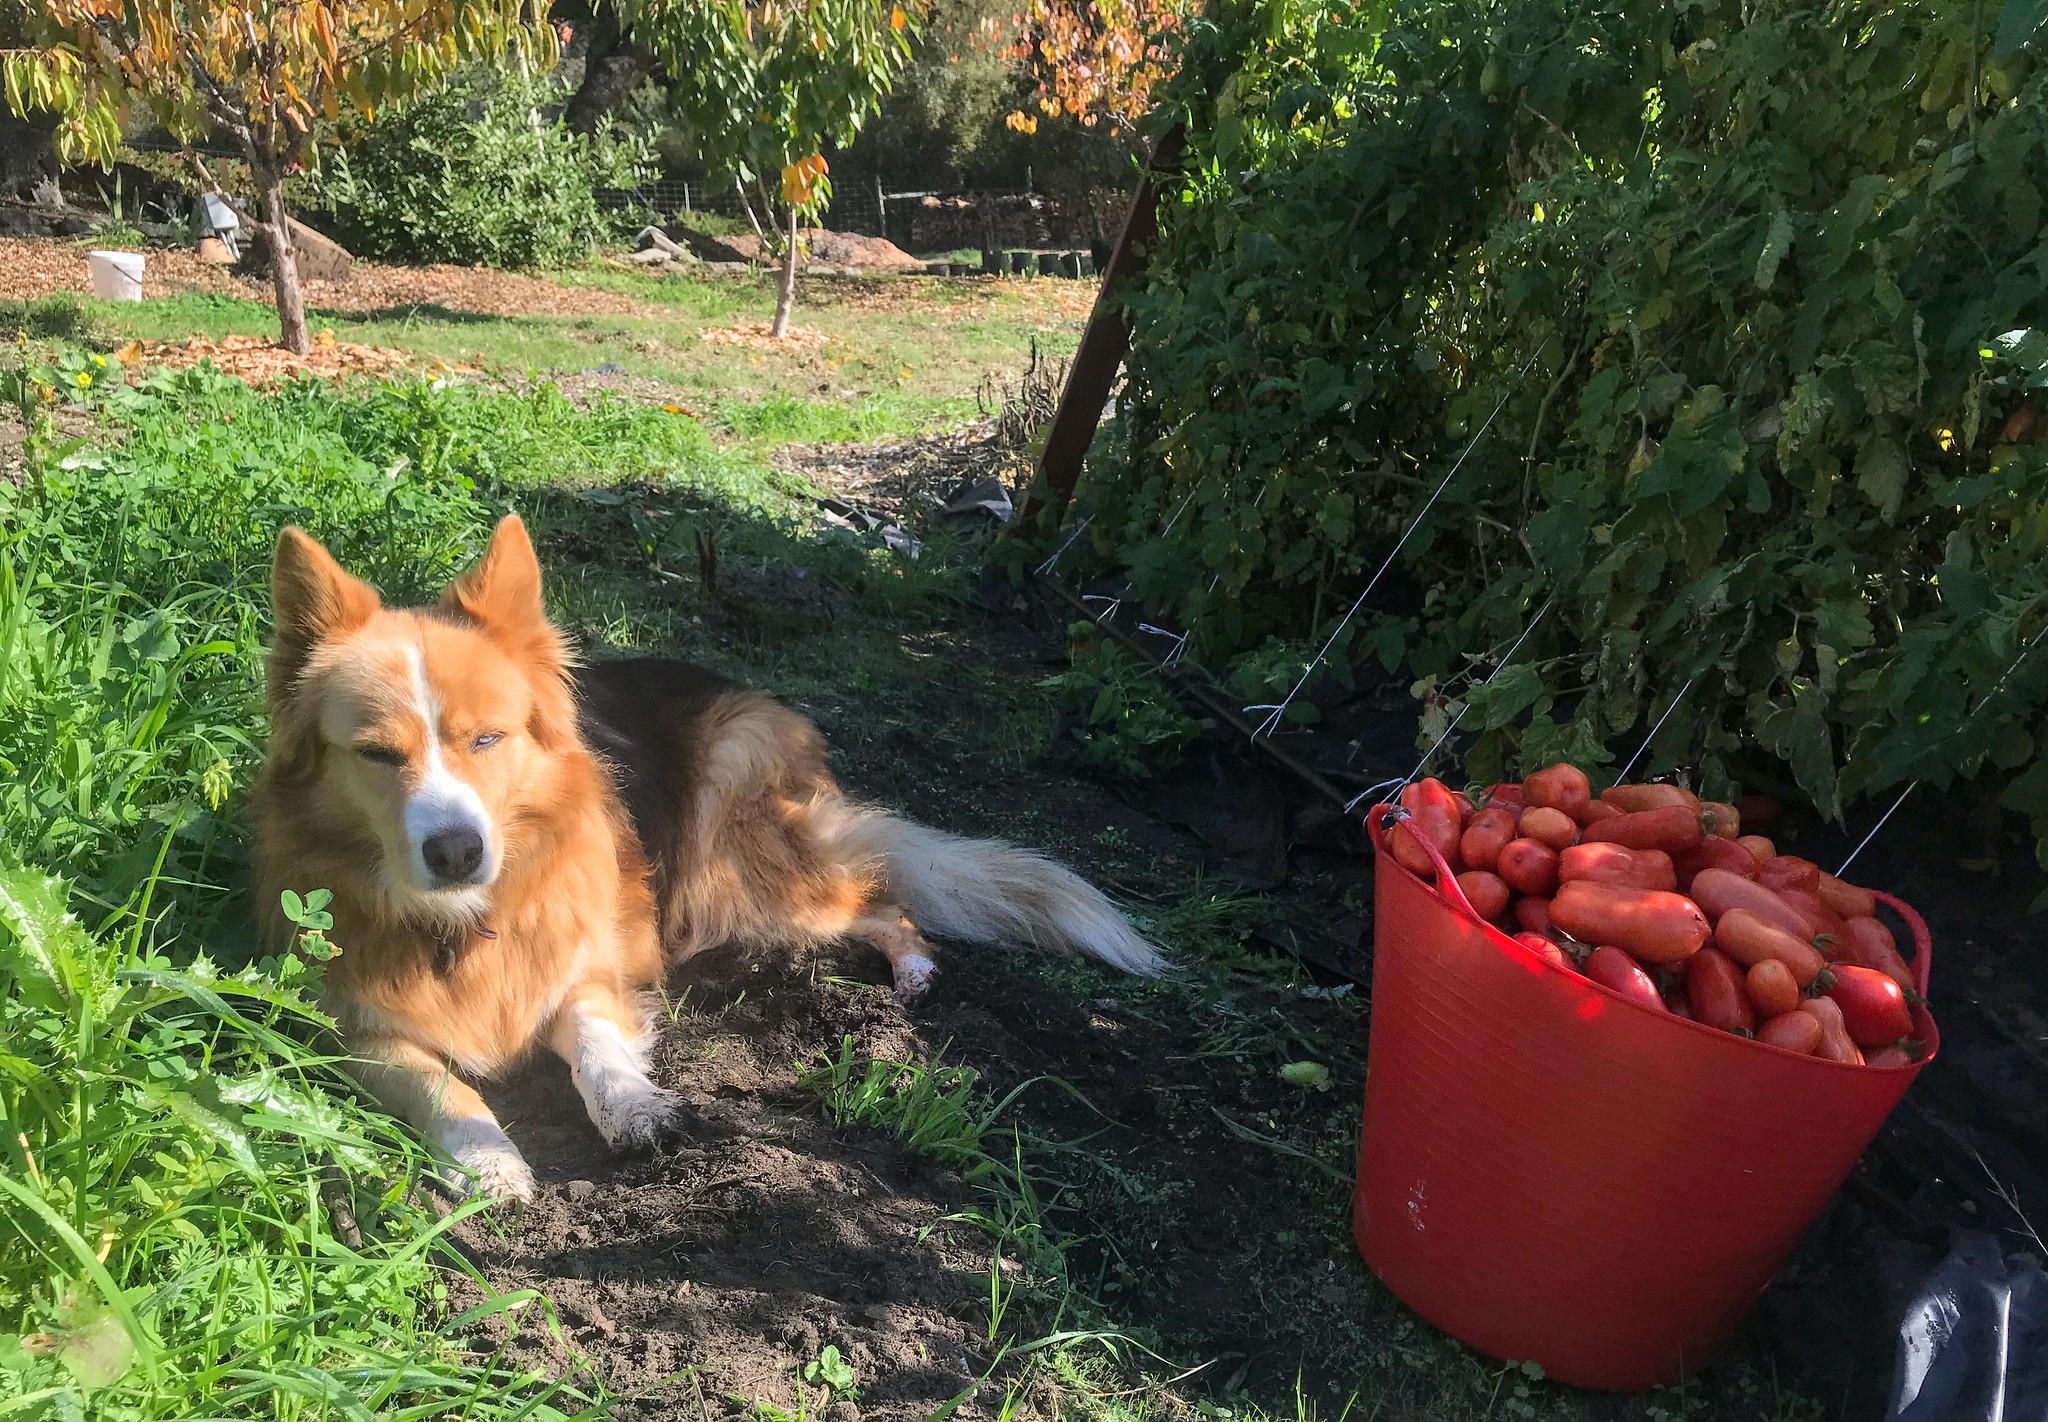 Honey keeping company during the 🍅 harvest